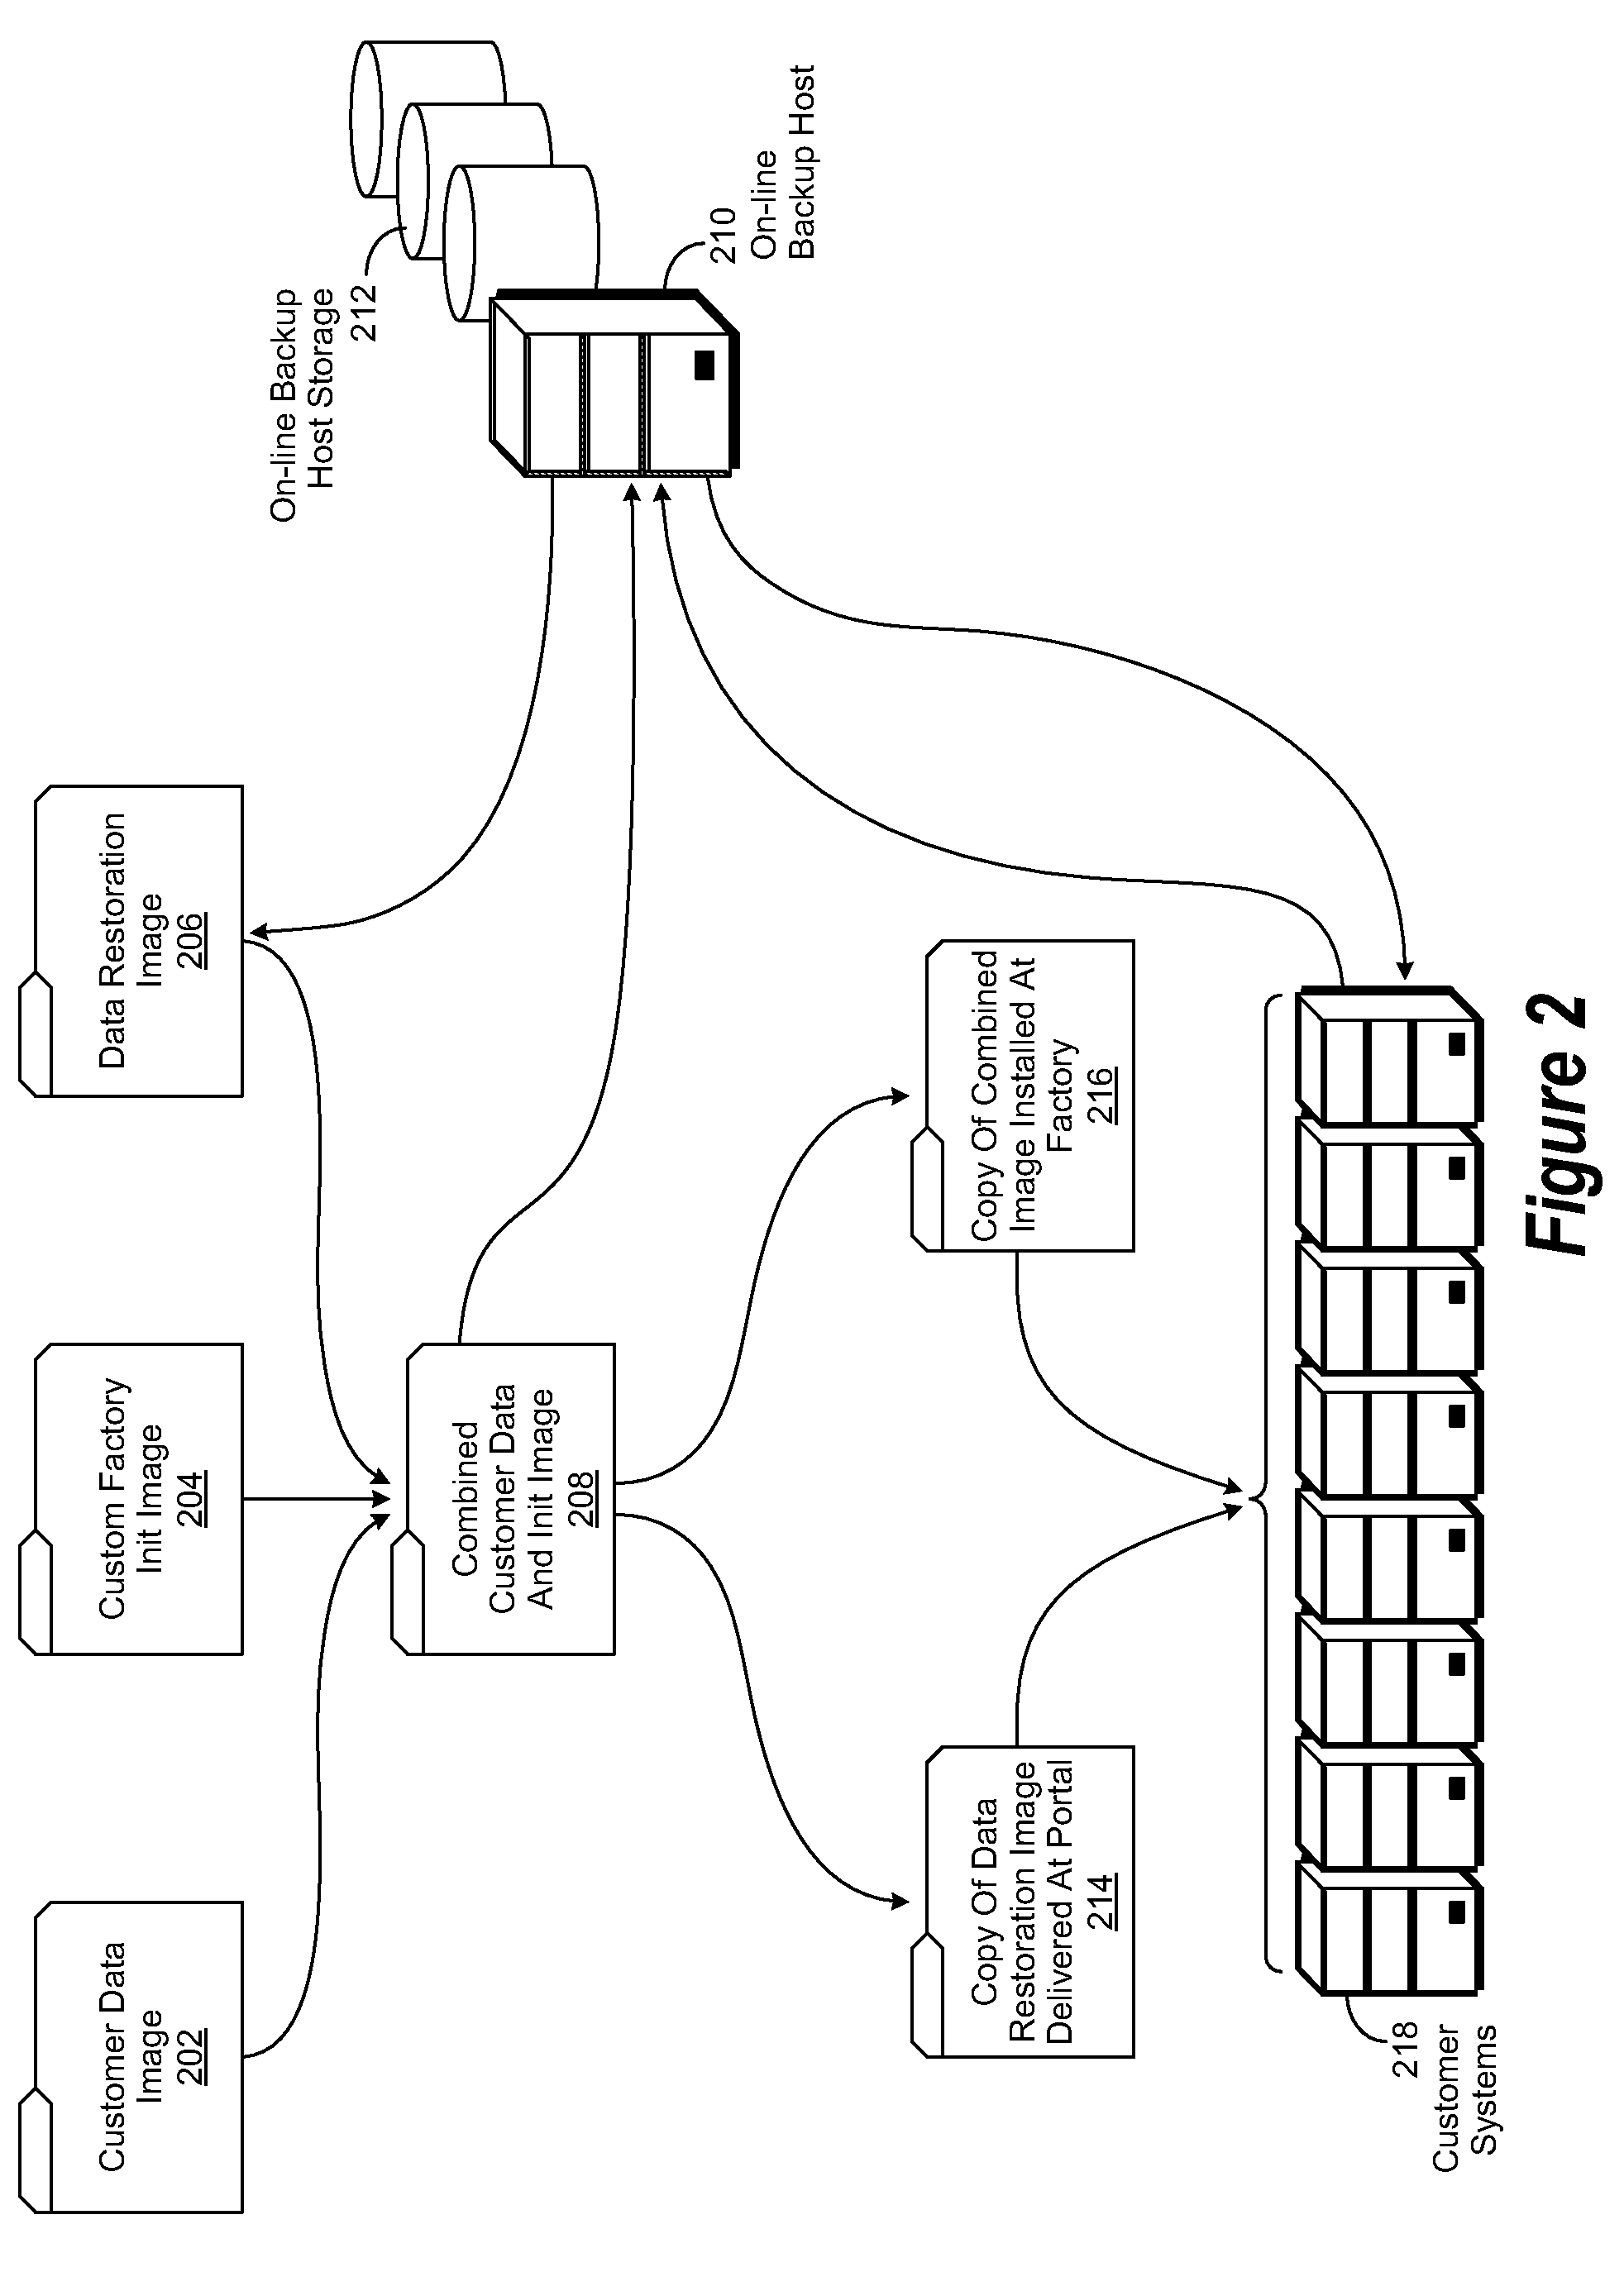 Method and apparatus for full backups in advance